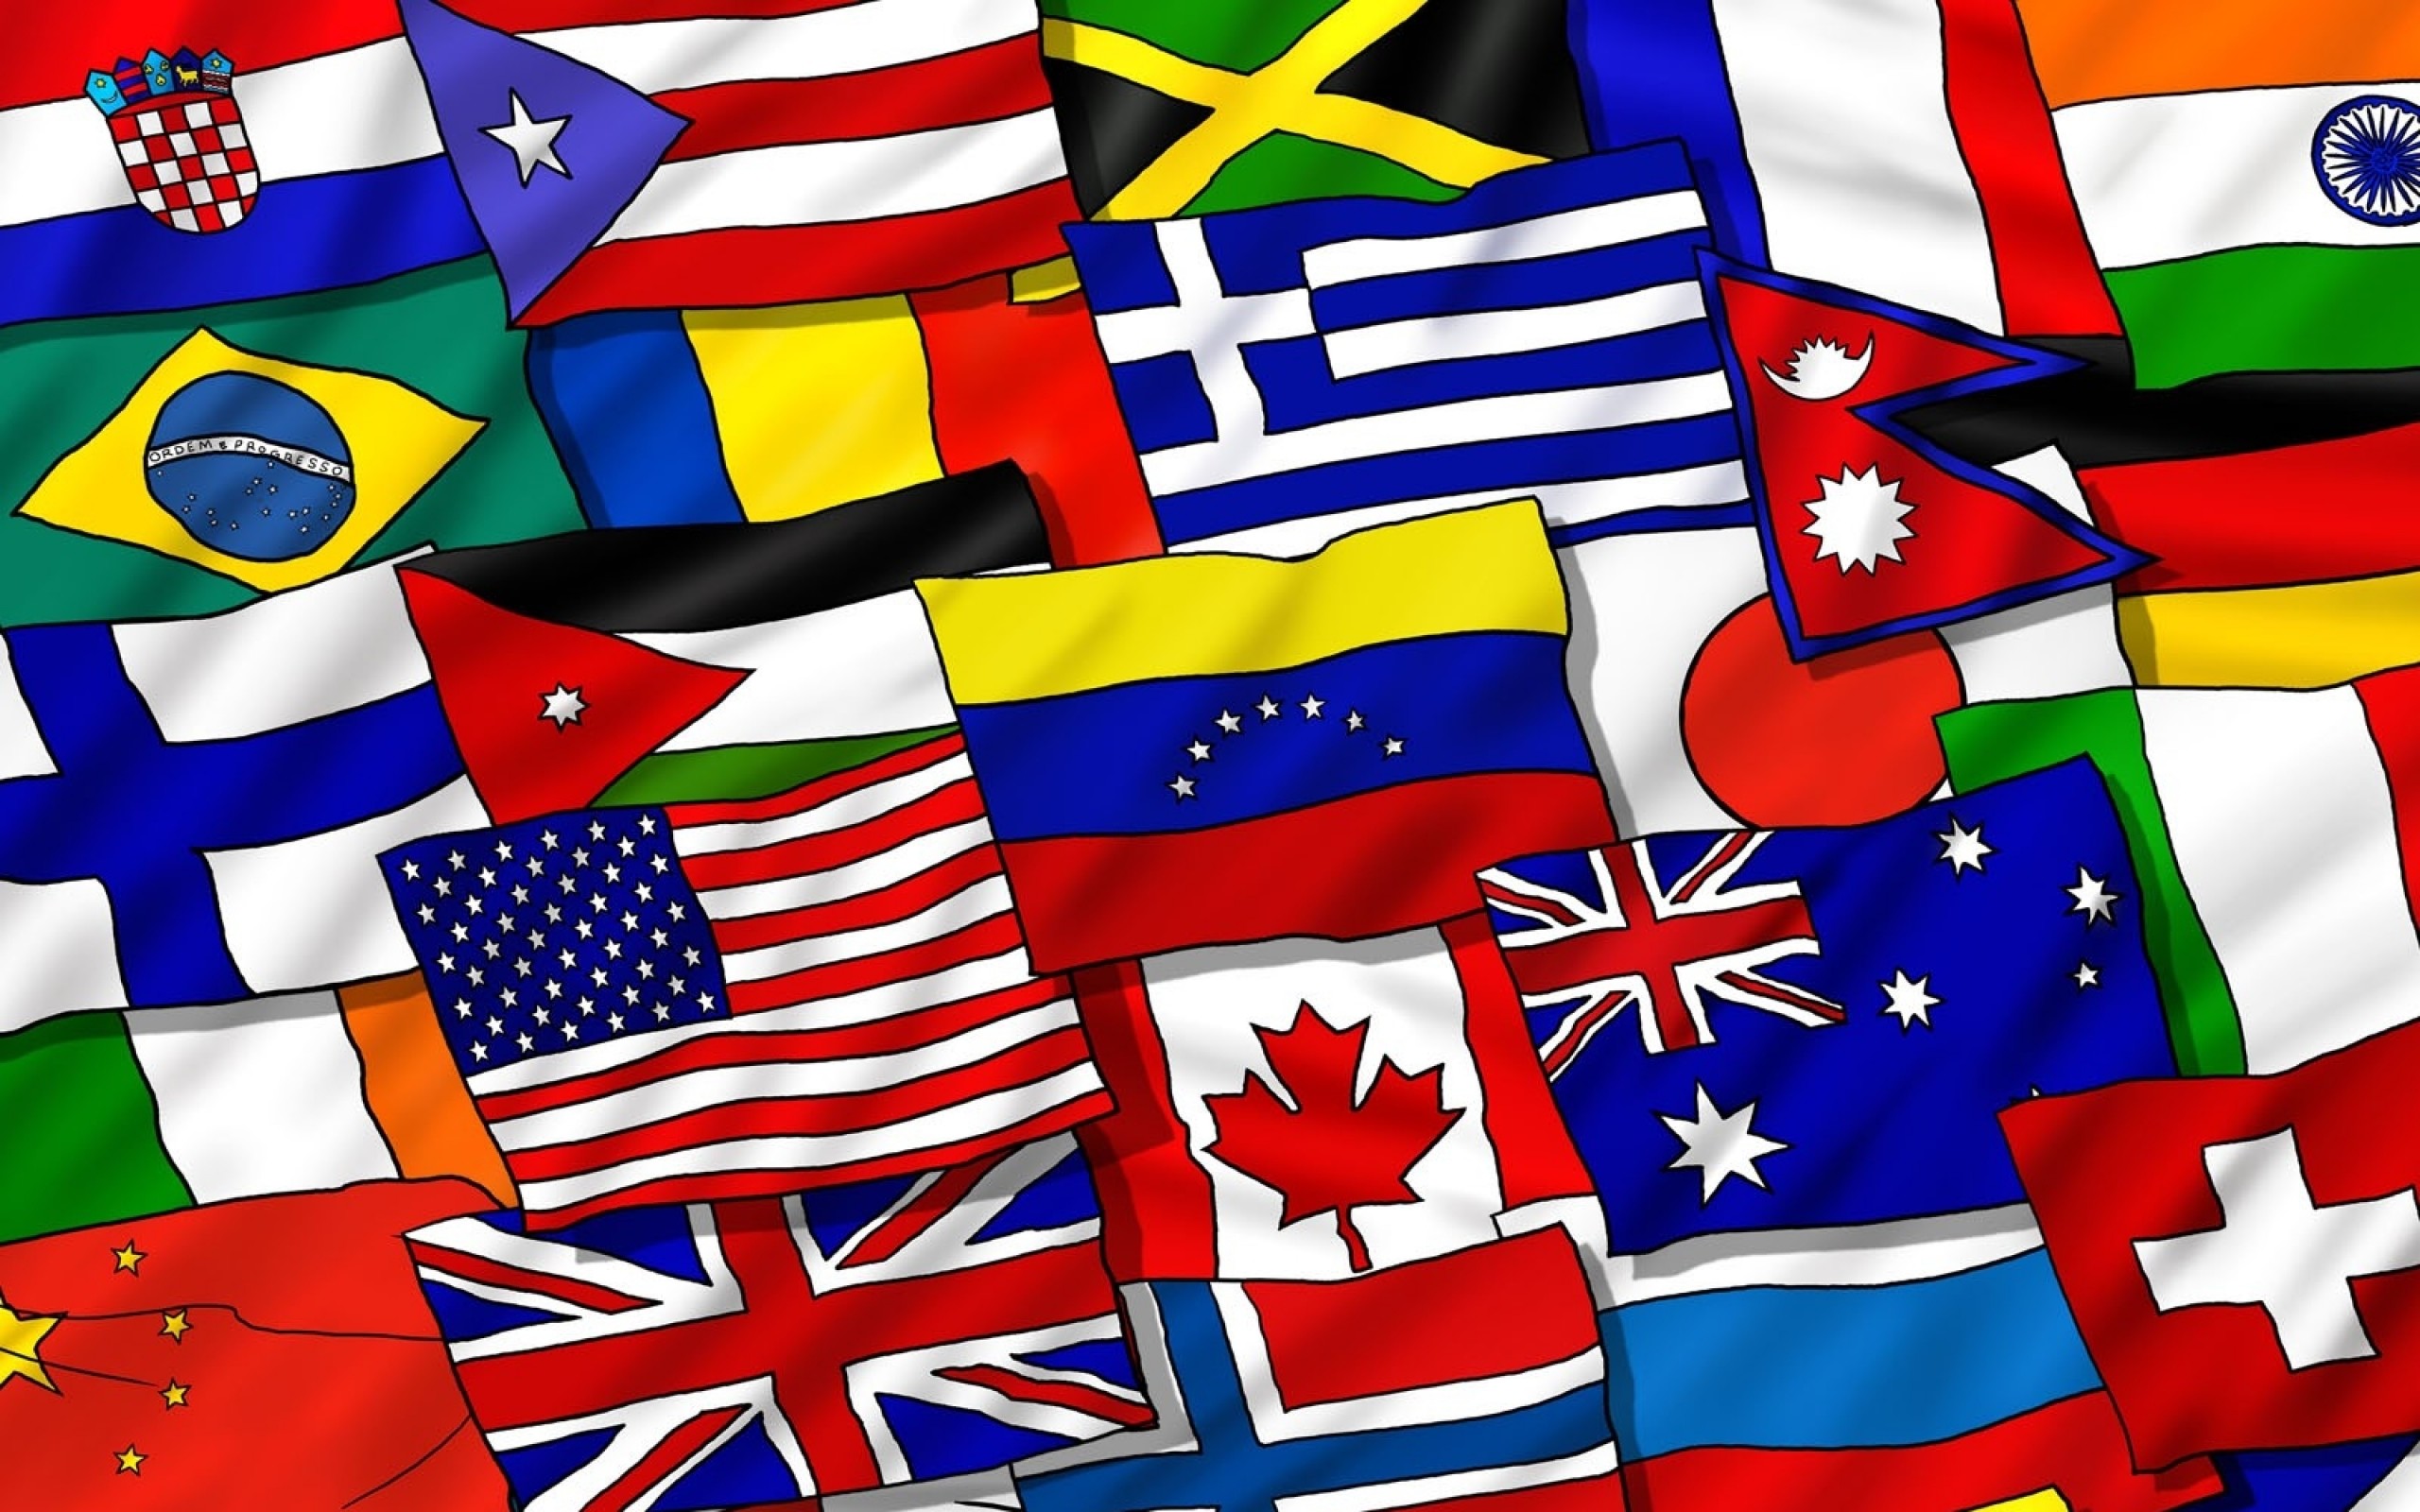 Country Flags Wallpaper Flags Of The World Country Flags World The